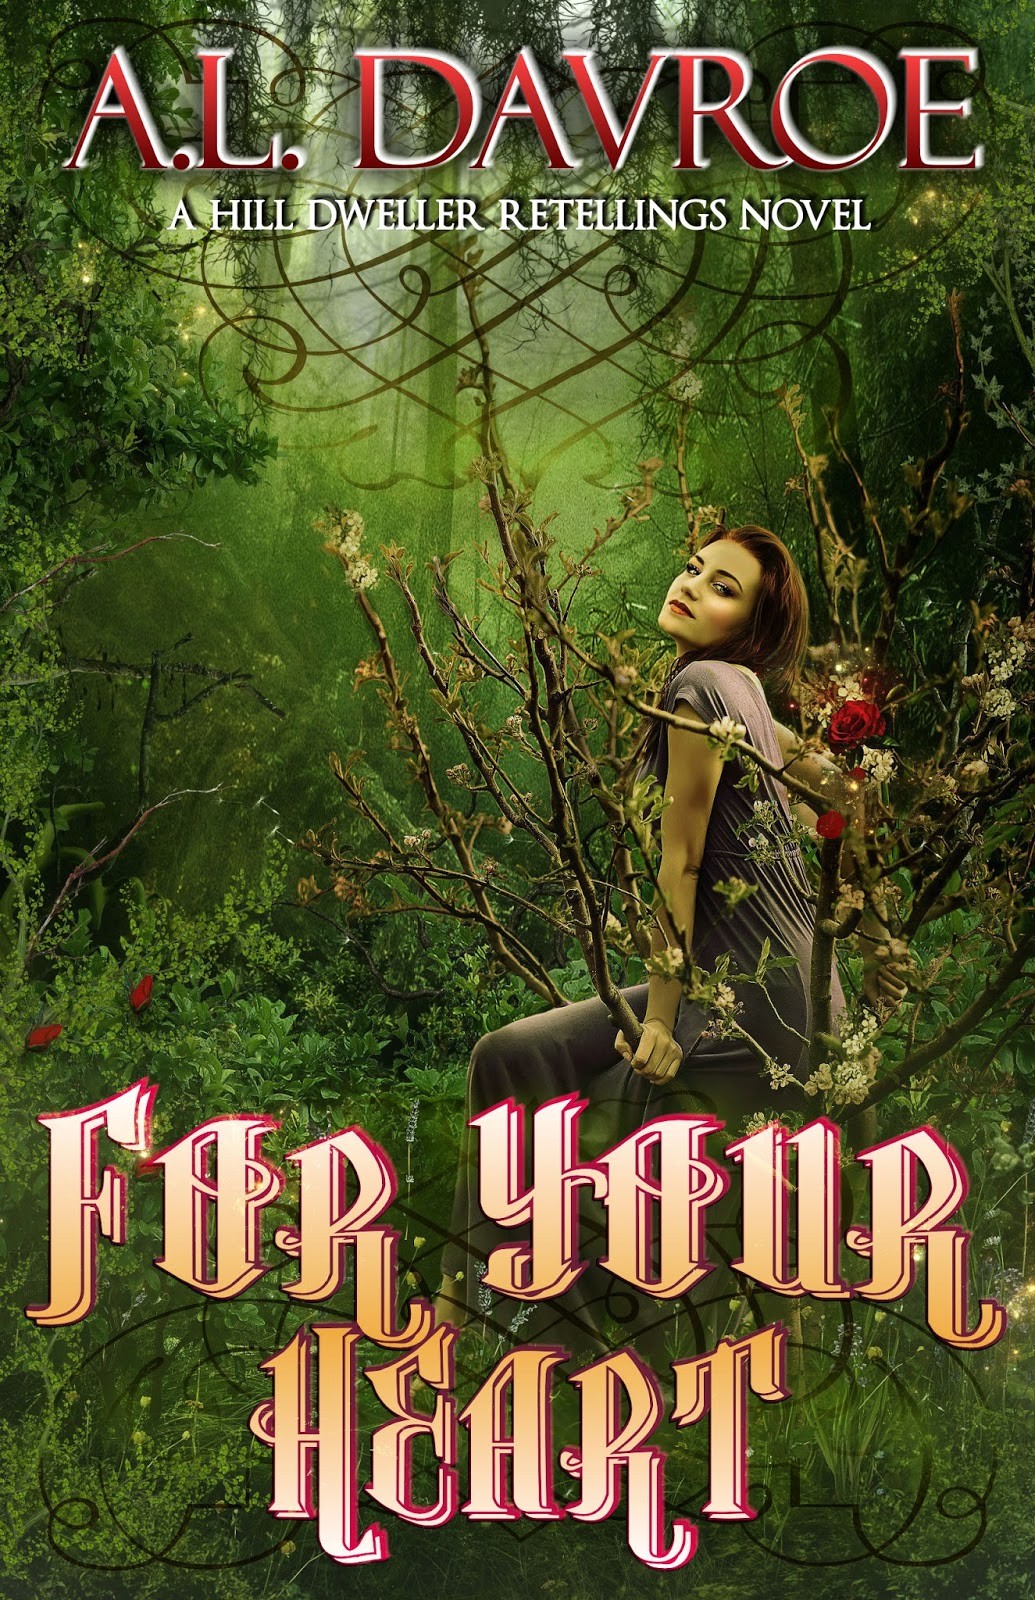 For Your Heart: A Hill Dweller Retellings